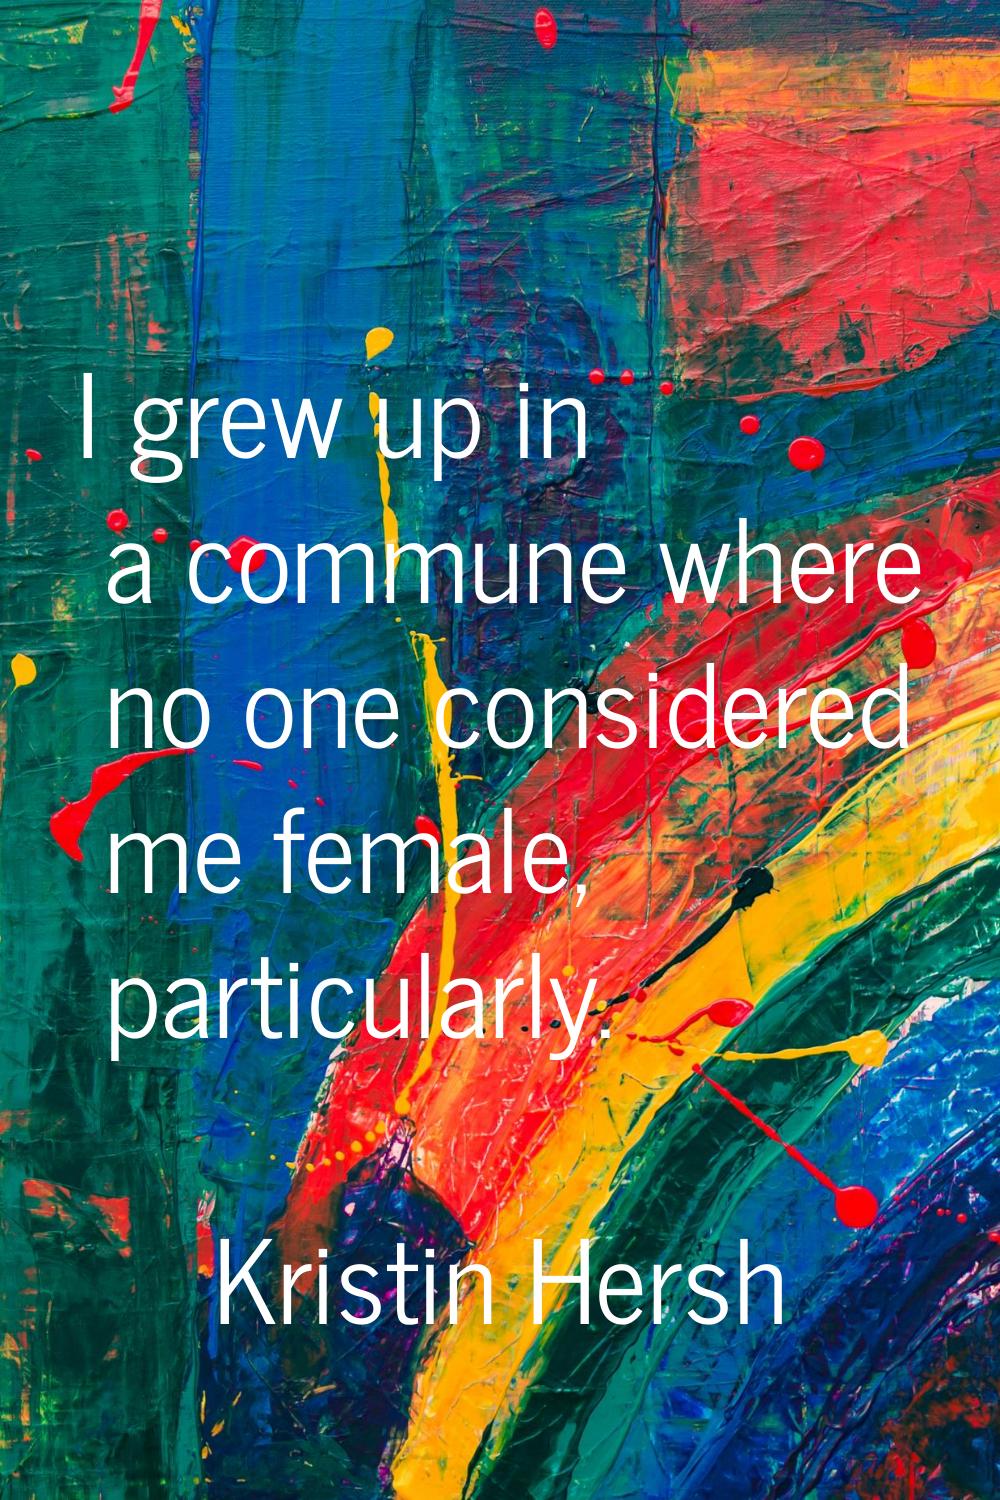 I grew up in a commune where no one considered me female, particularly.